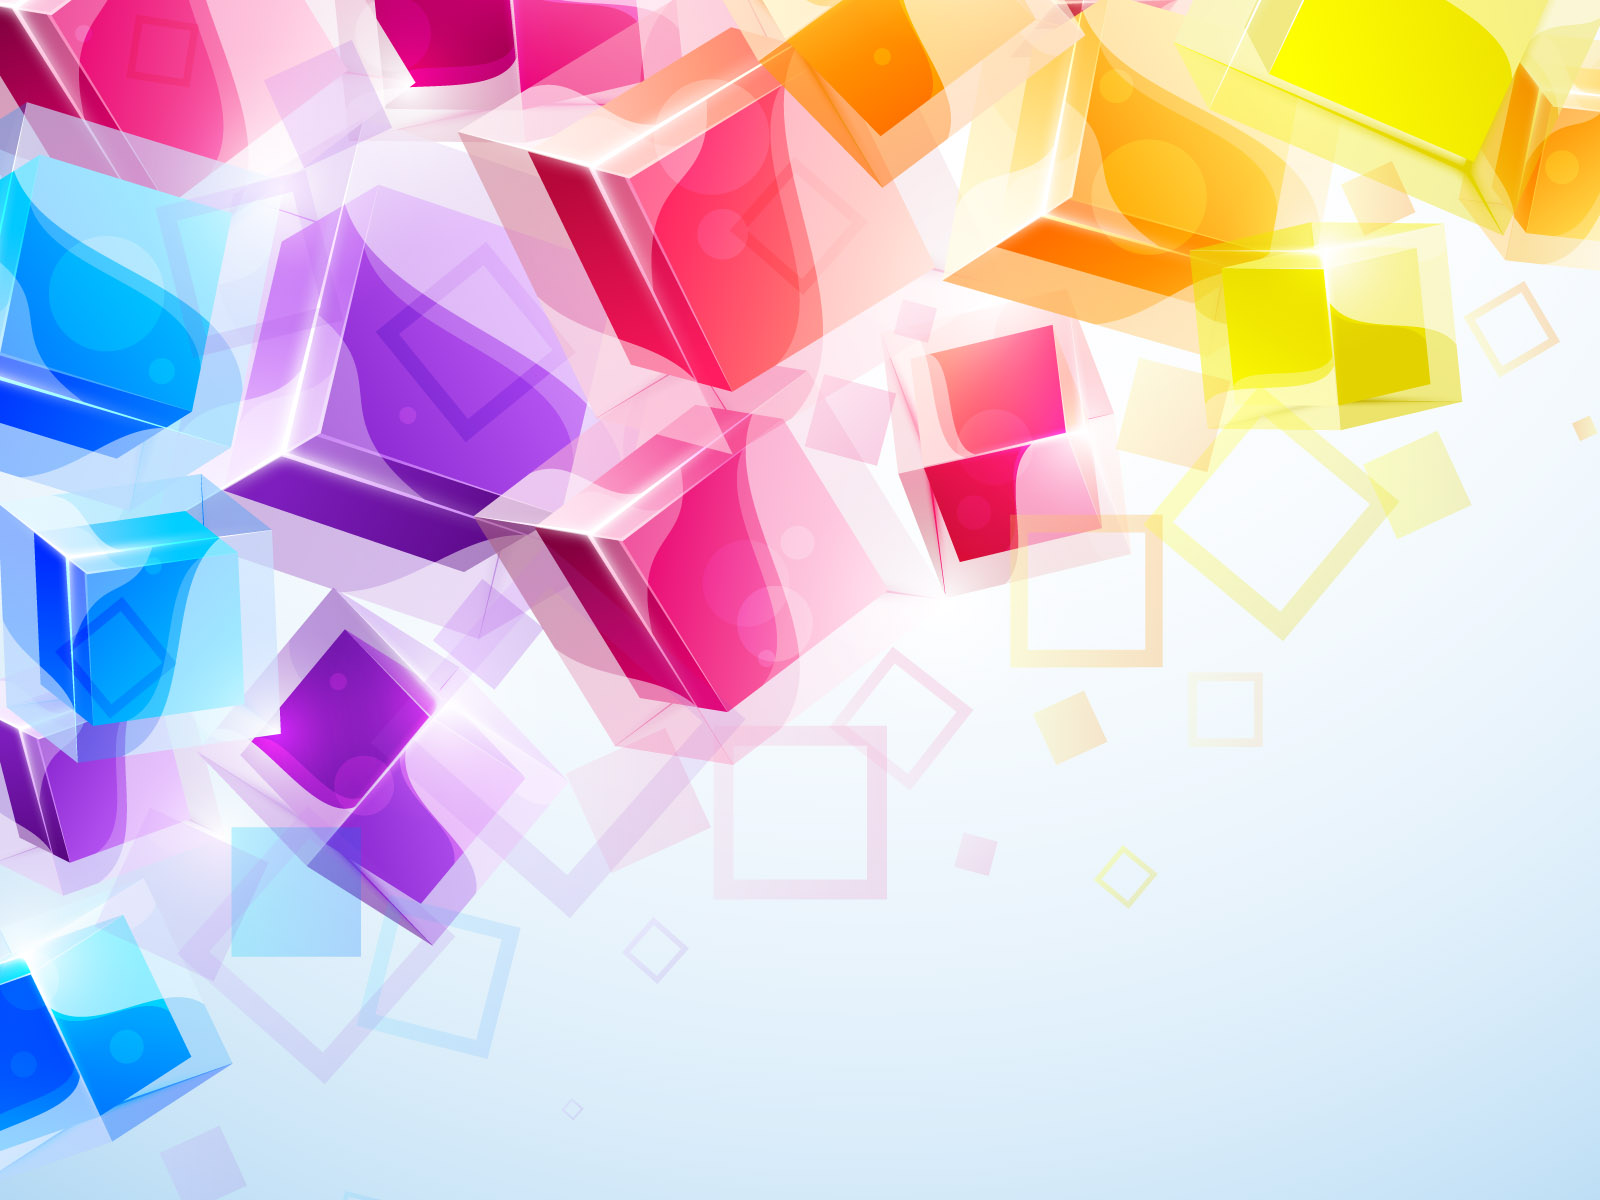 Free download 3D Business Colorful Square Background Wallpaper for